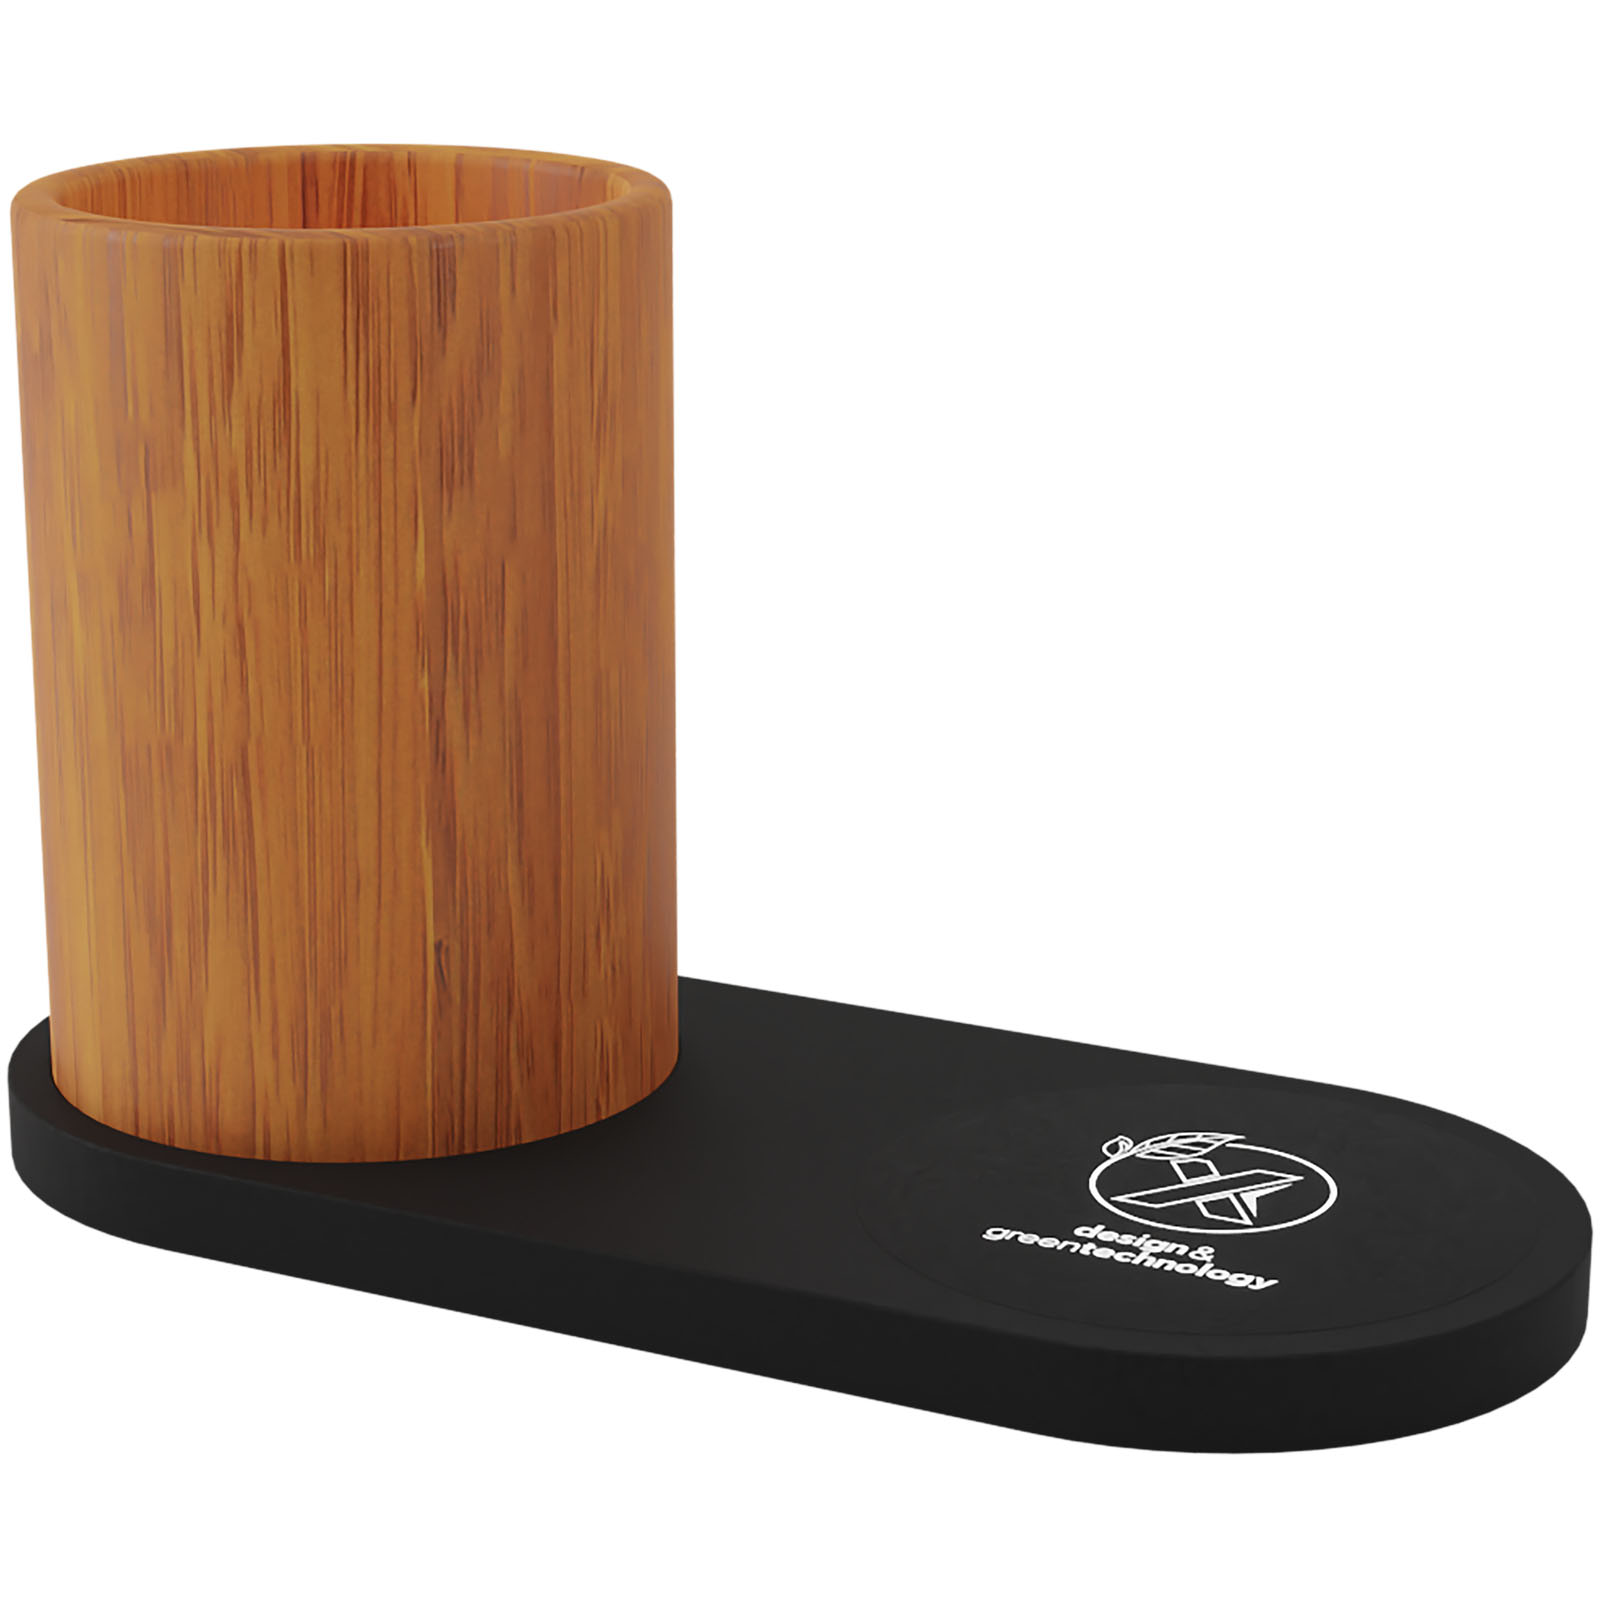 Bamboo Wireless Charging Pad with Pencil Holder - Bray